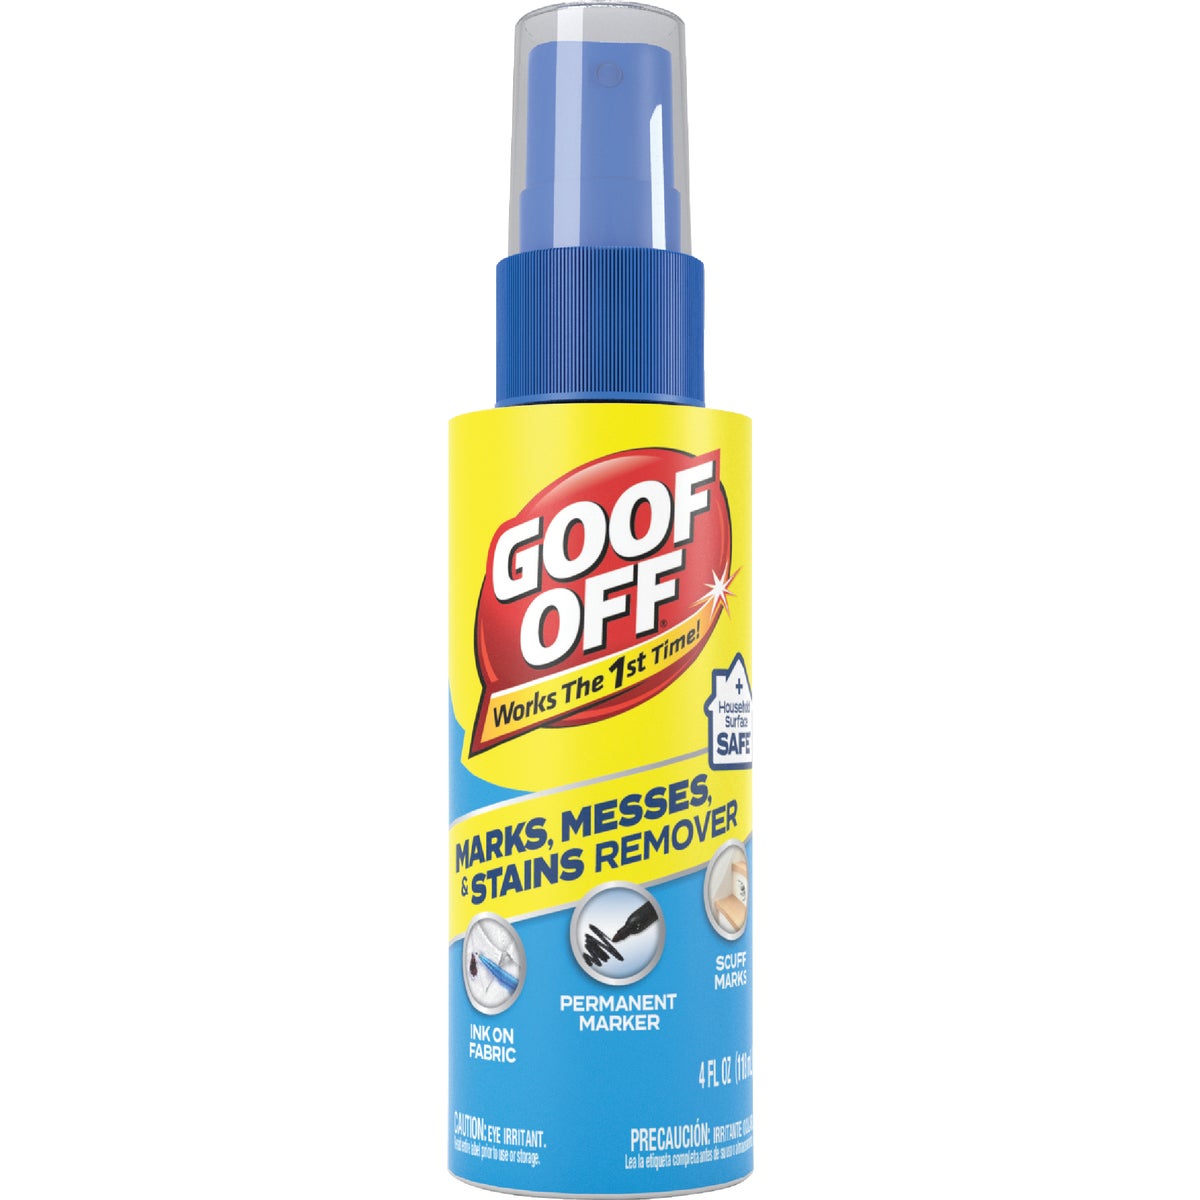 Item 620475, Goof Off Household Heavy Duty Remover cuts through the toughest stains on 